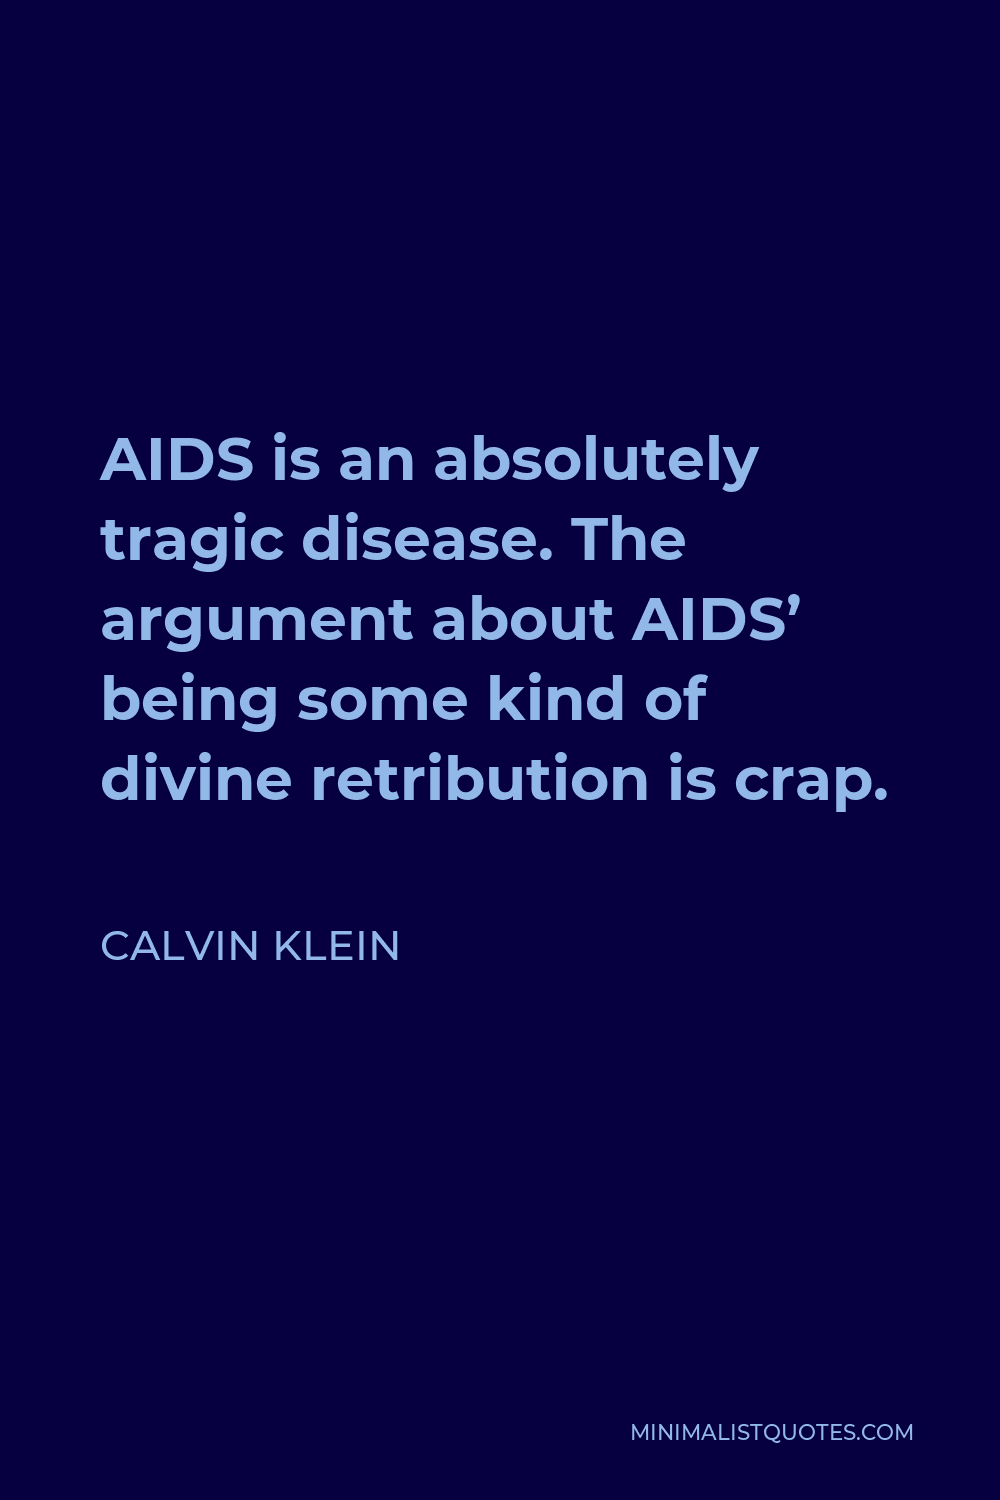 Calvin Klein Quote - AIDS is an absolutely tragic disease. The argument about AIDS’ being some kind of divine retribution is crap.